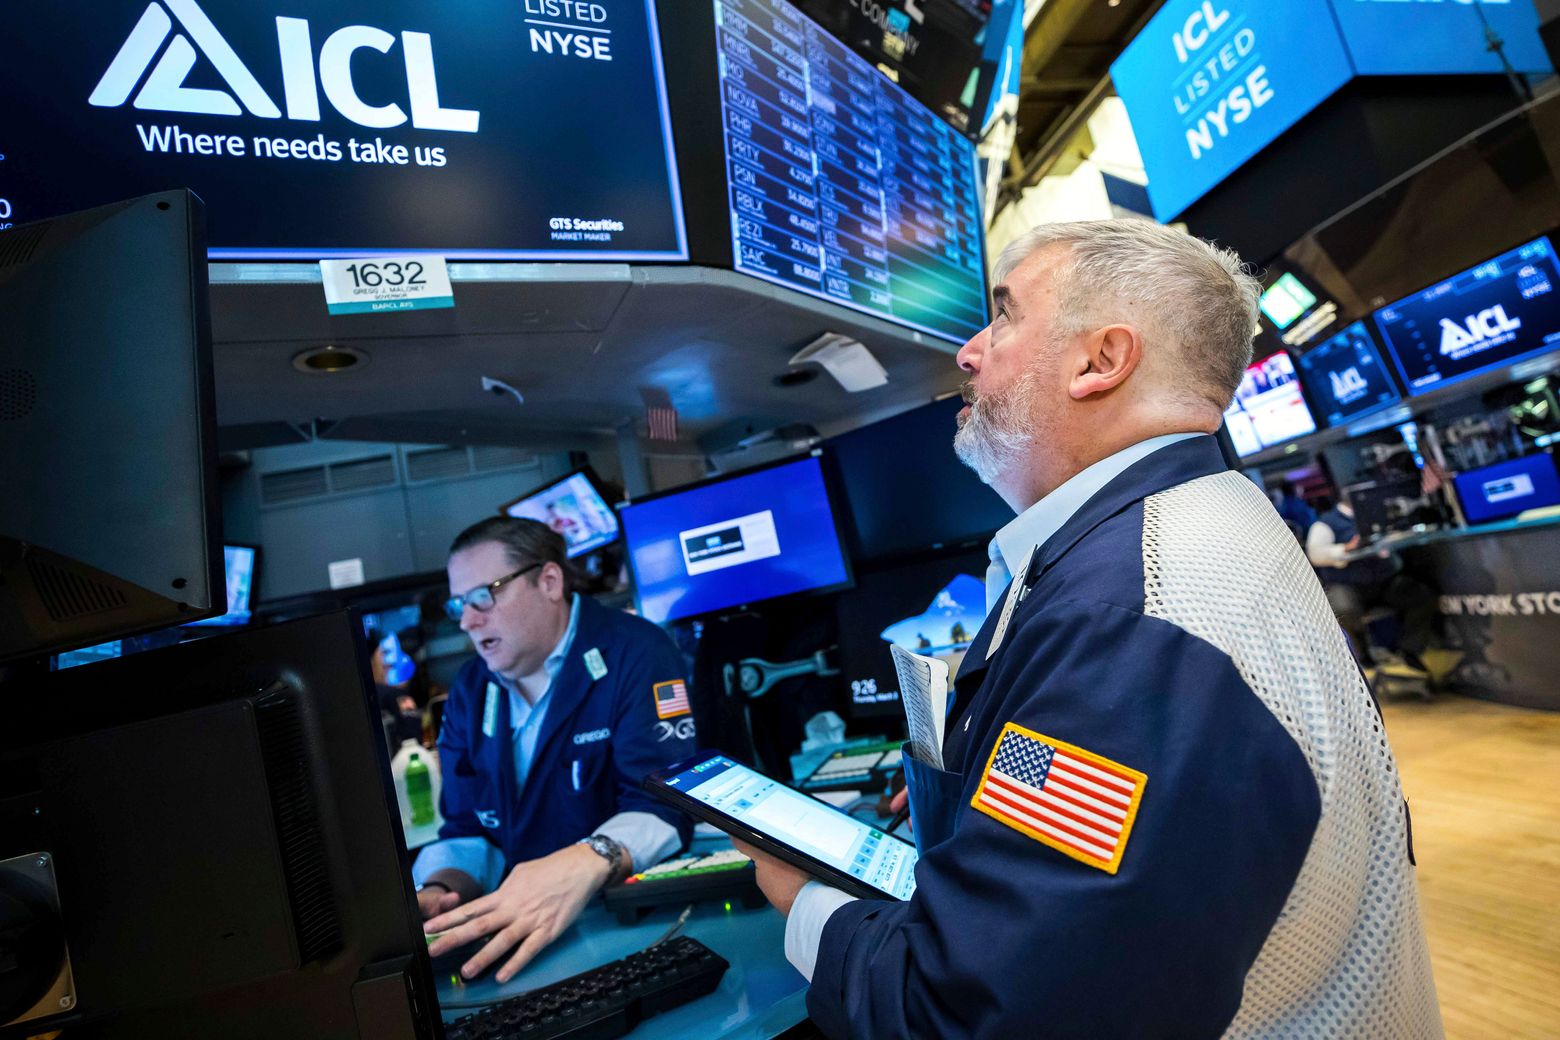 Stocks end another bumpy day lower and crude oil prices ease | The Seattle Times